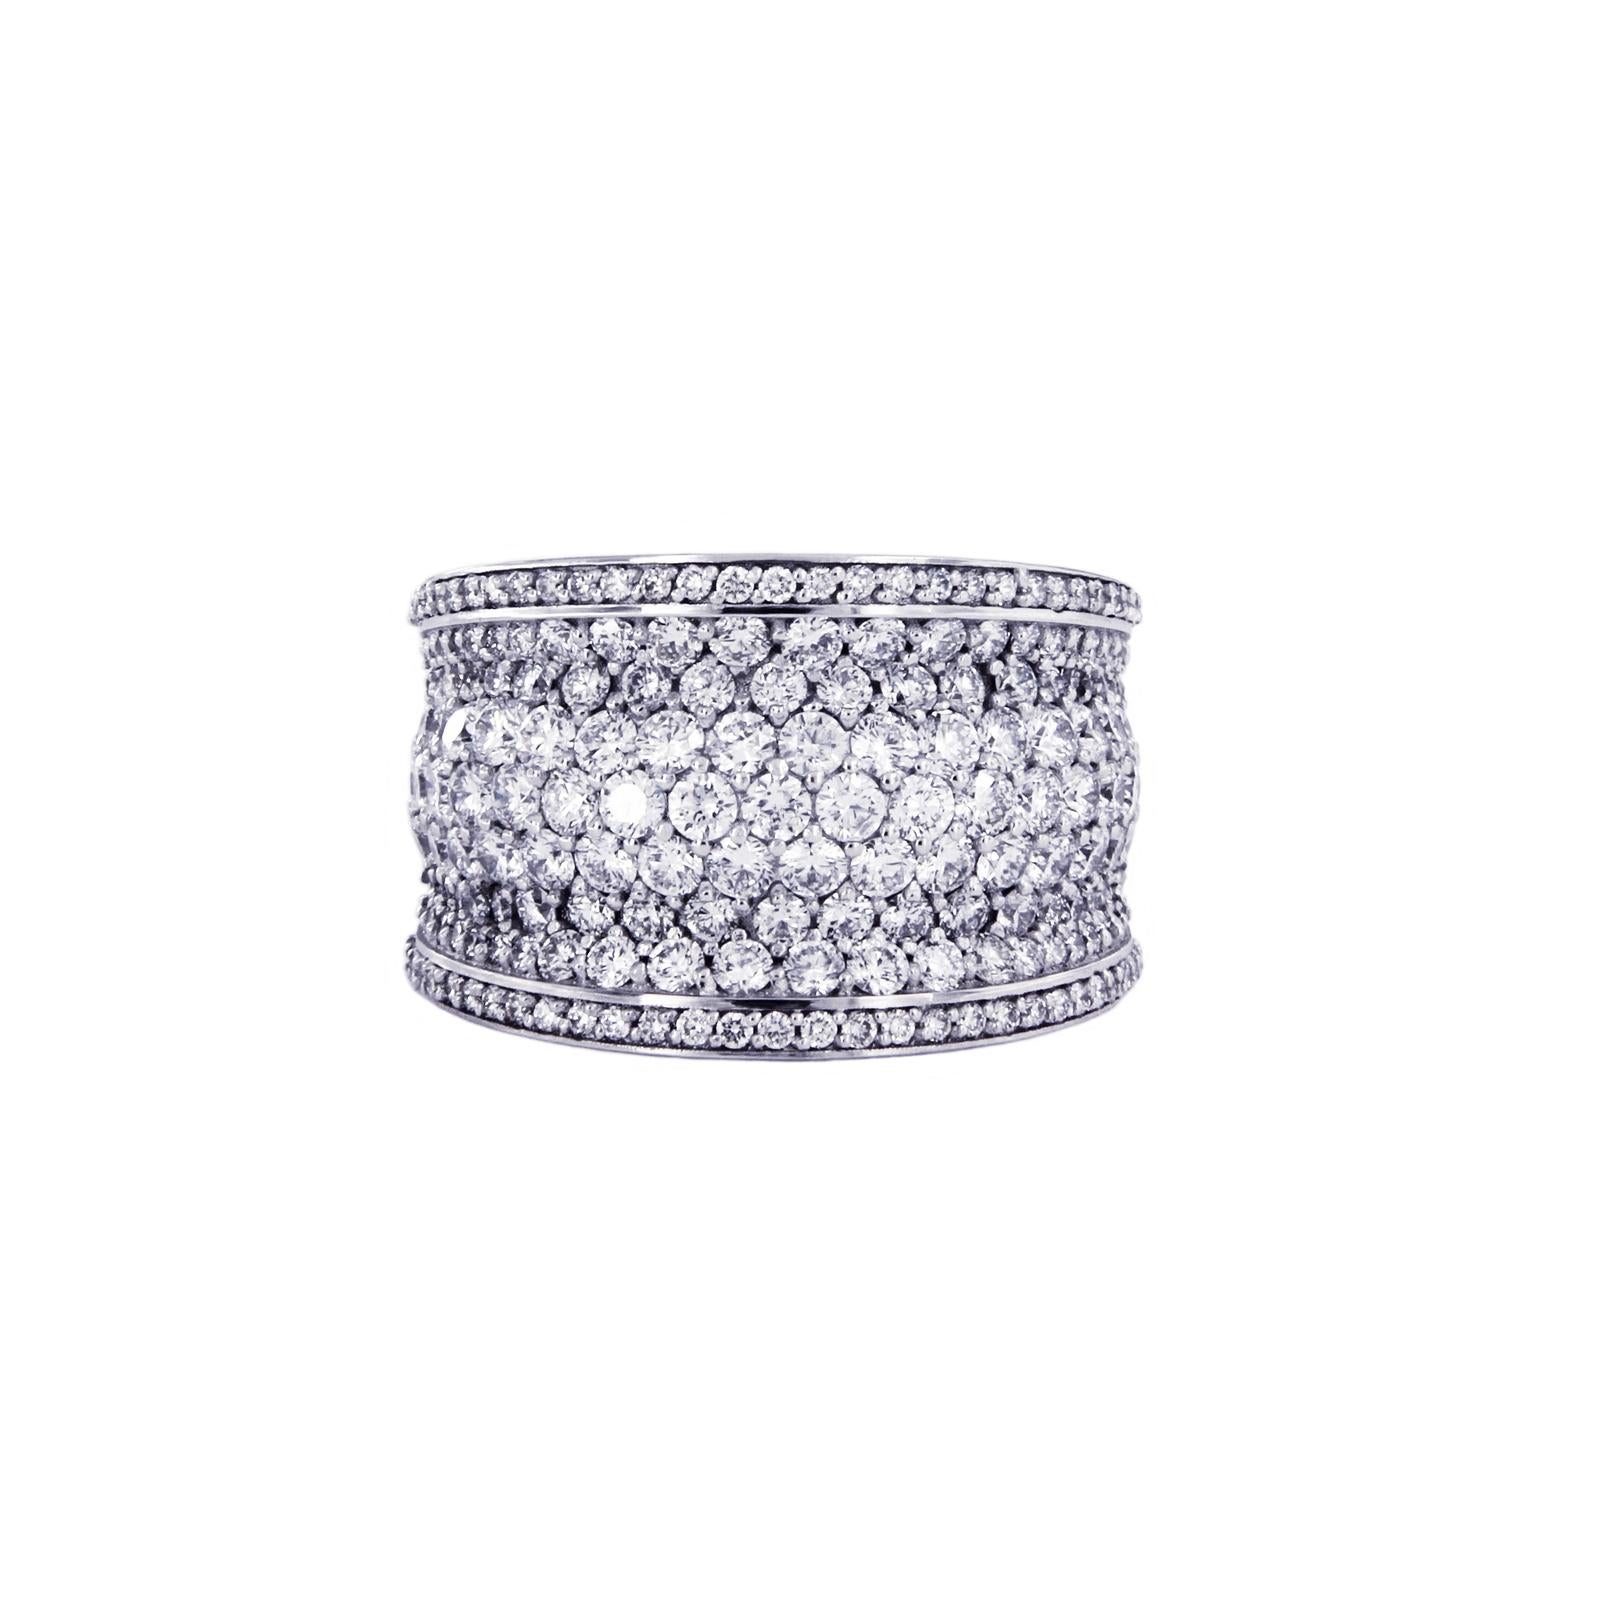 -Custom made
-14k White Gold
-Ring size: 12
-Ring weight: 20gr
-Diamond: 5.5 ct, VS clarity, G color
*Original Retail: $9500